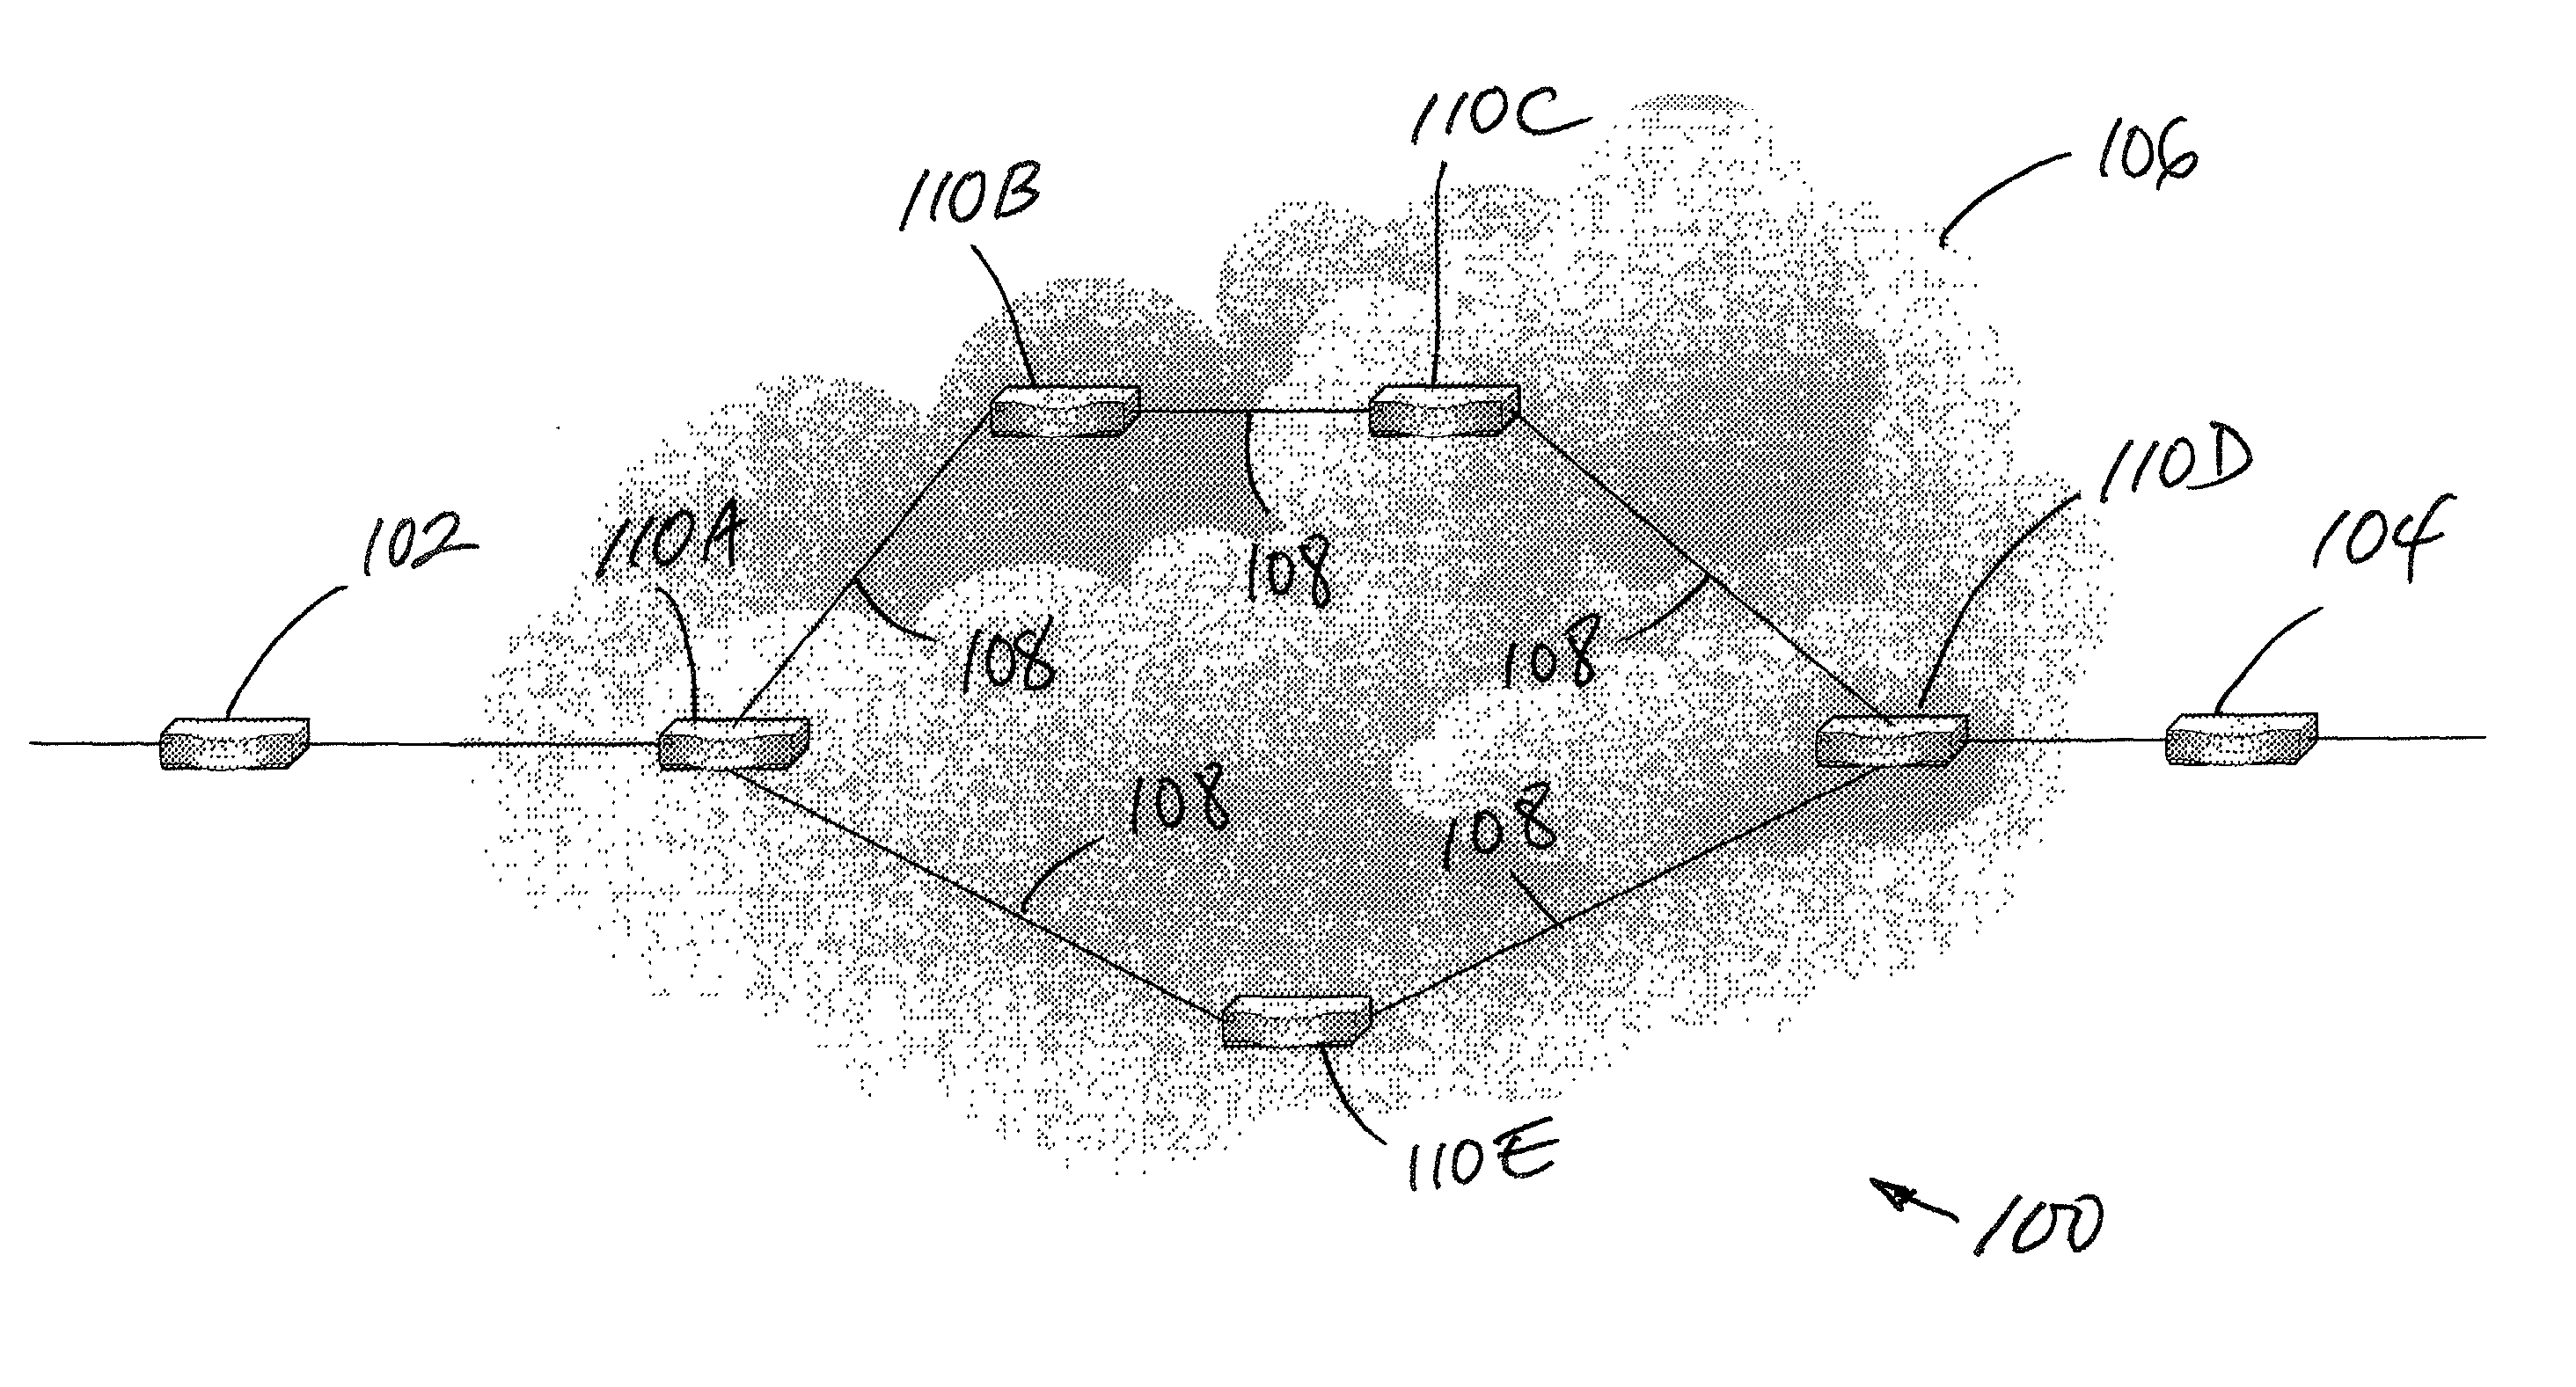 System and method for providing service availability data for a communication network